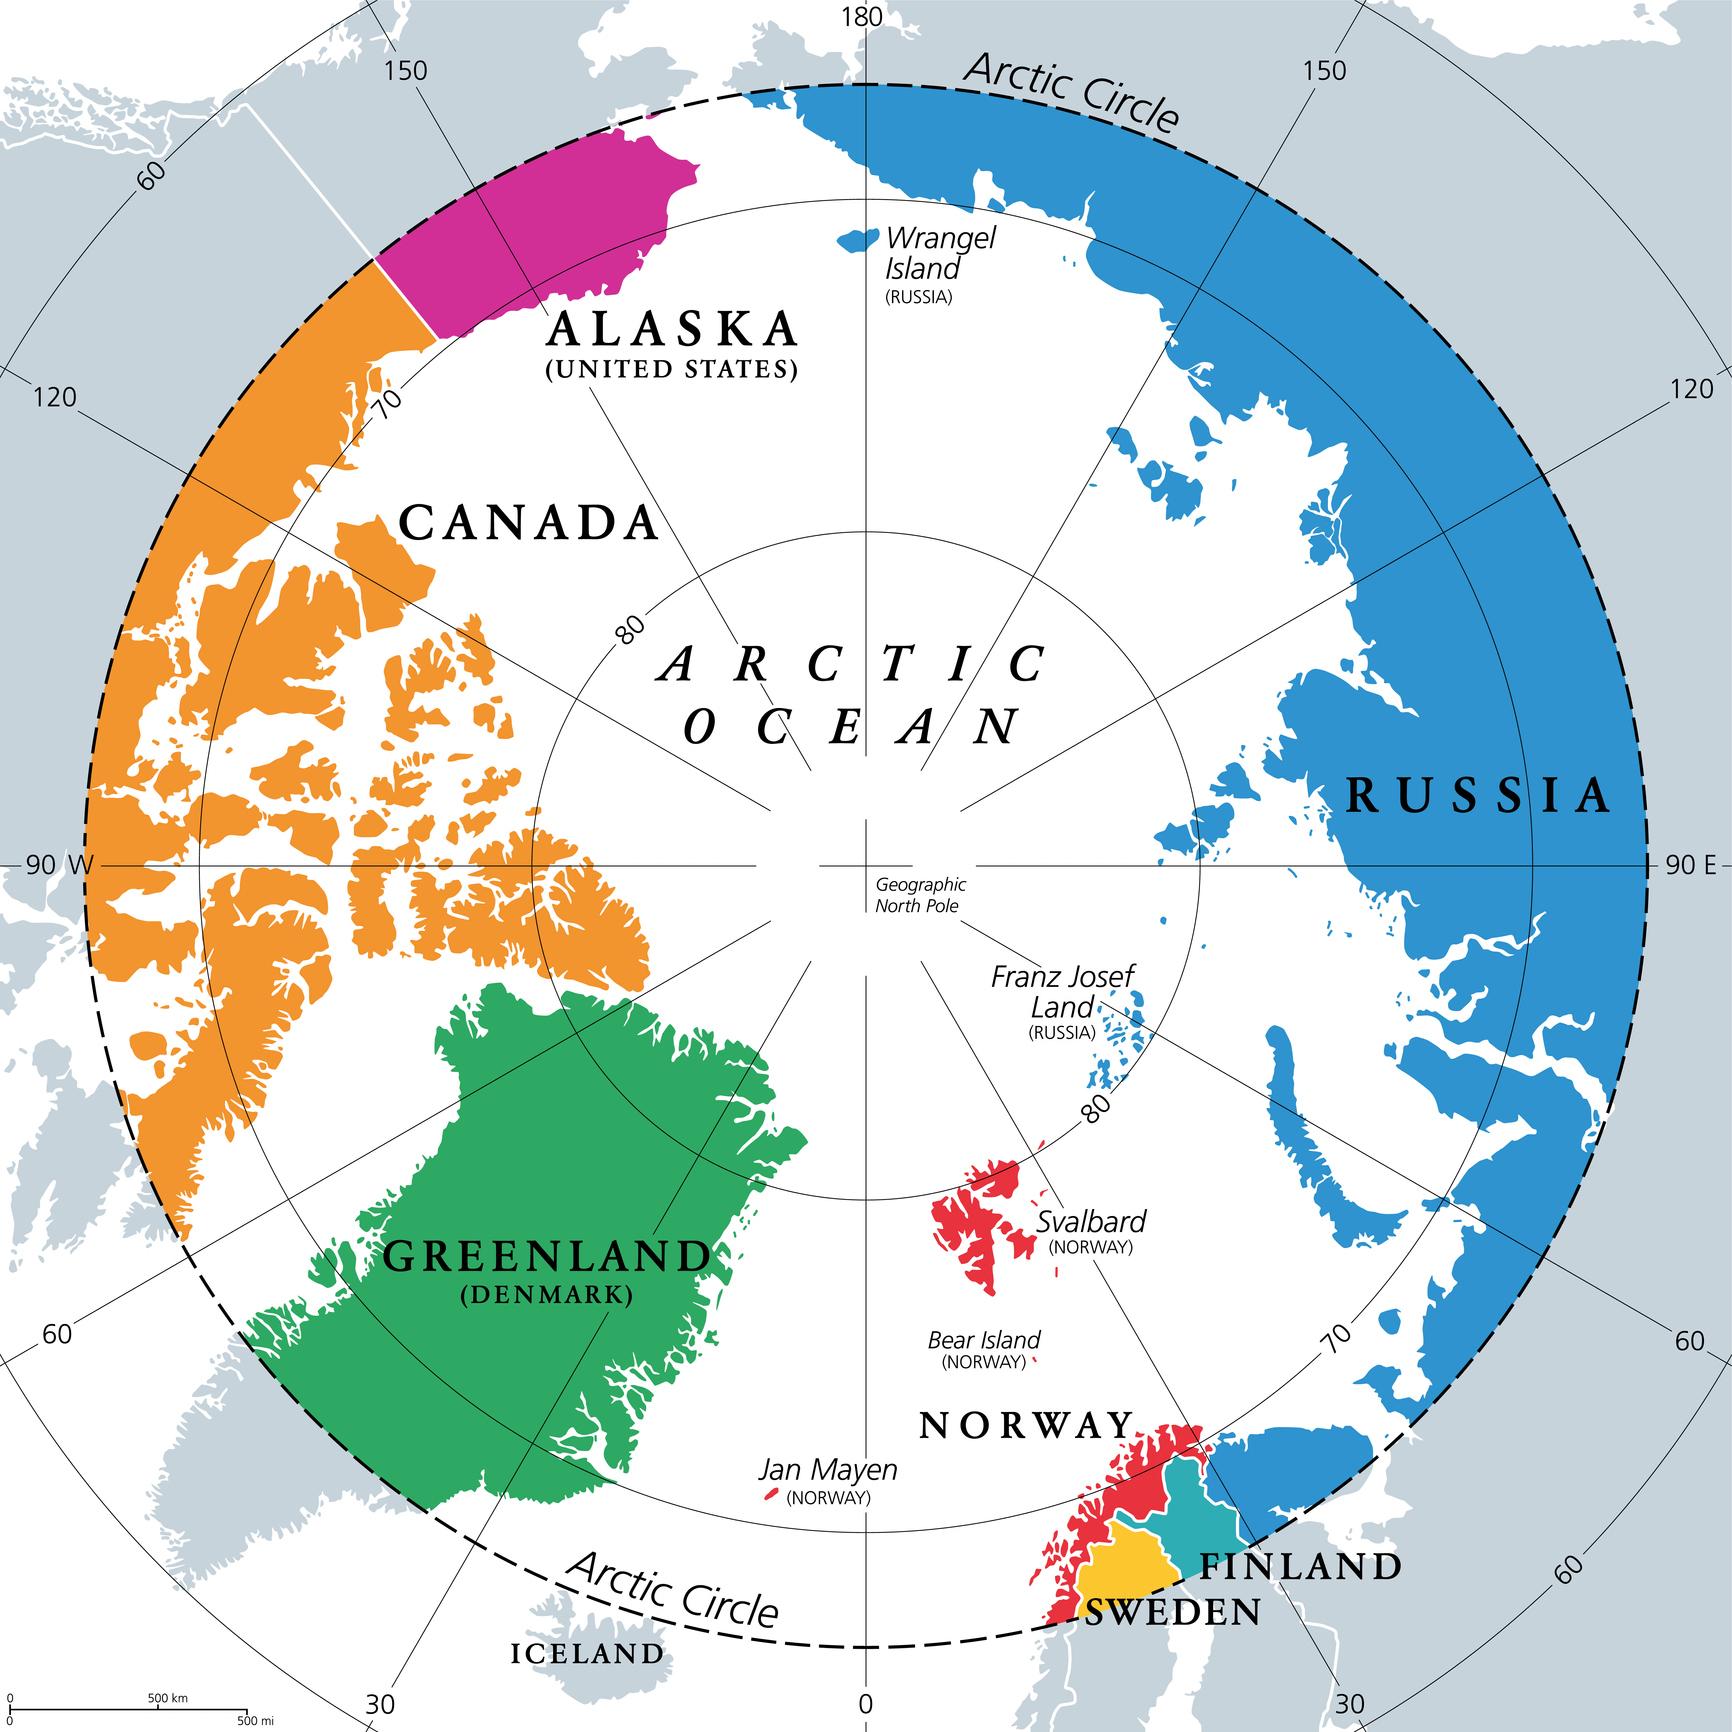 A map of the Arctic Circle regions